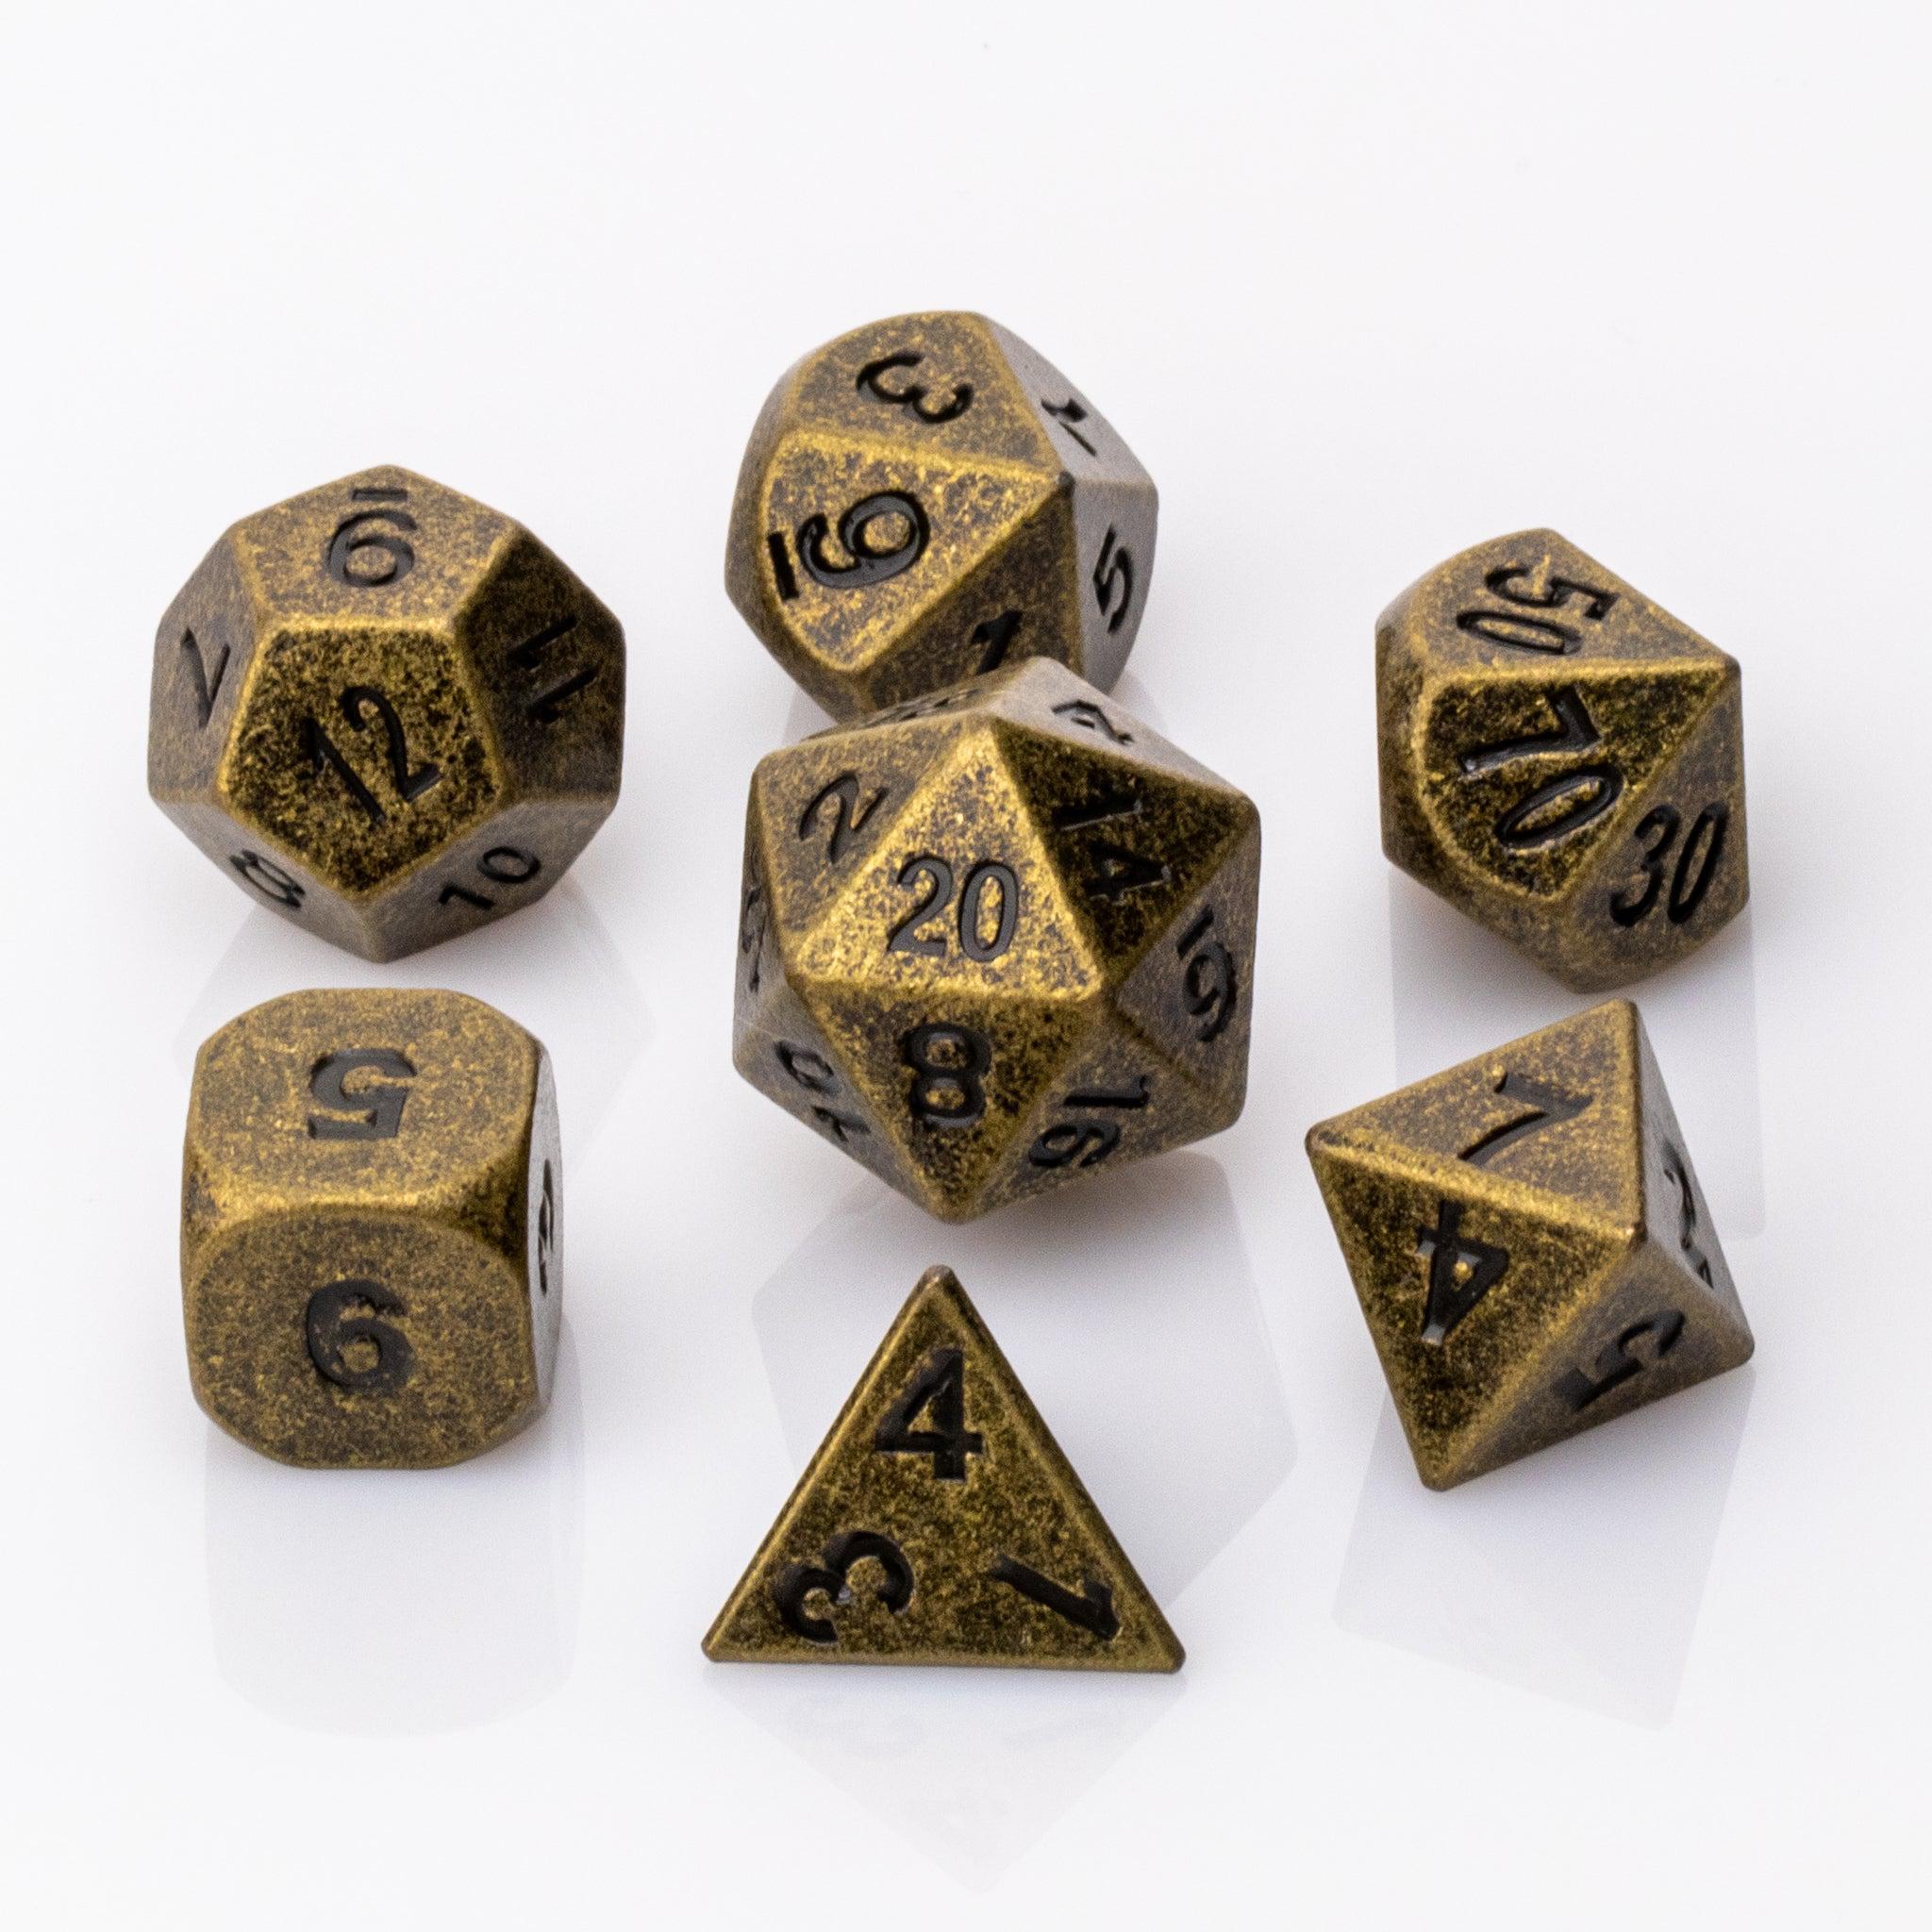 Thunk, weathered bronze colored metal DND dice set on a white background.